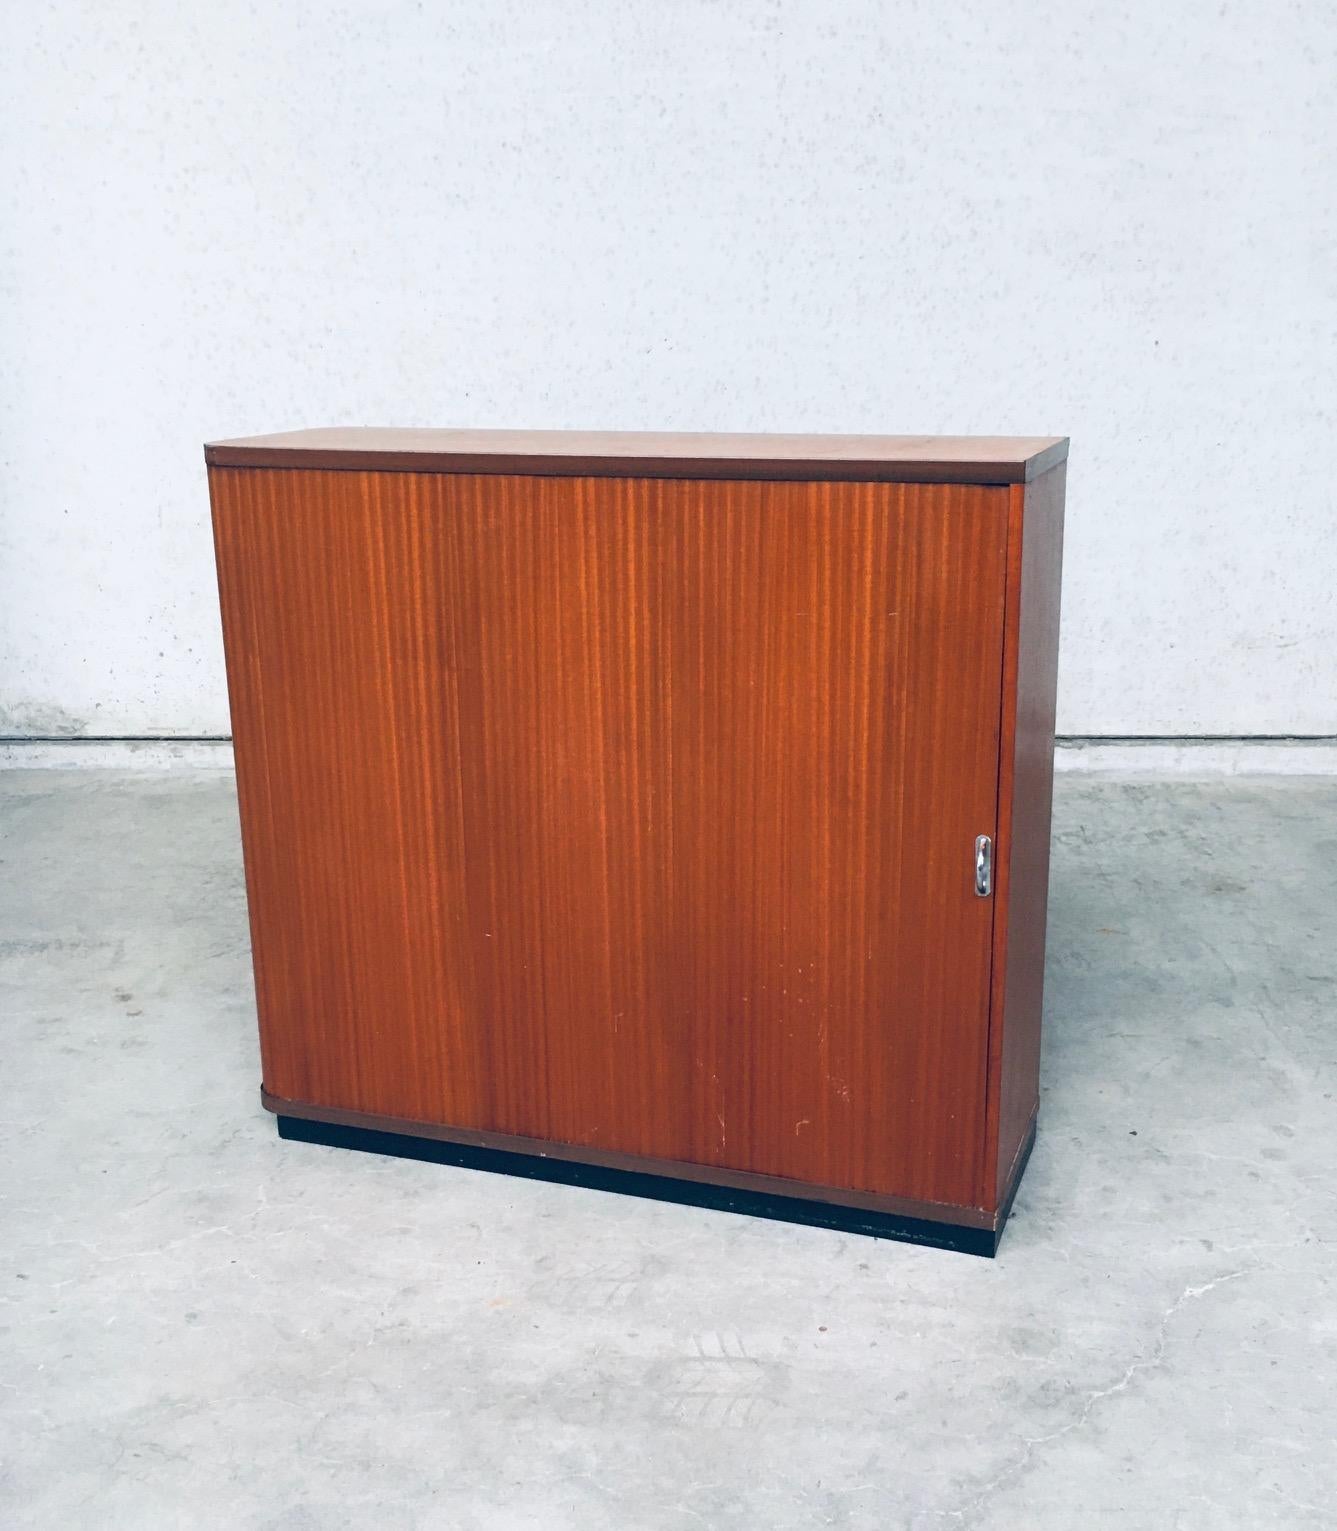 Vintage Mid-Century Modern design sliding door filing cabinet, made in Belgium 1960s. Wood with wood veneer constructed cabinet with a sliding door that slides all the way open to the back. Has 2 shelves. Comes in good overal condition, with good